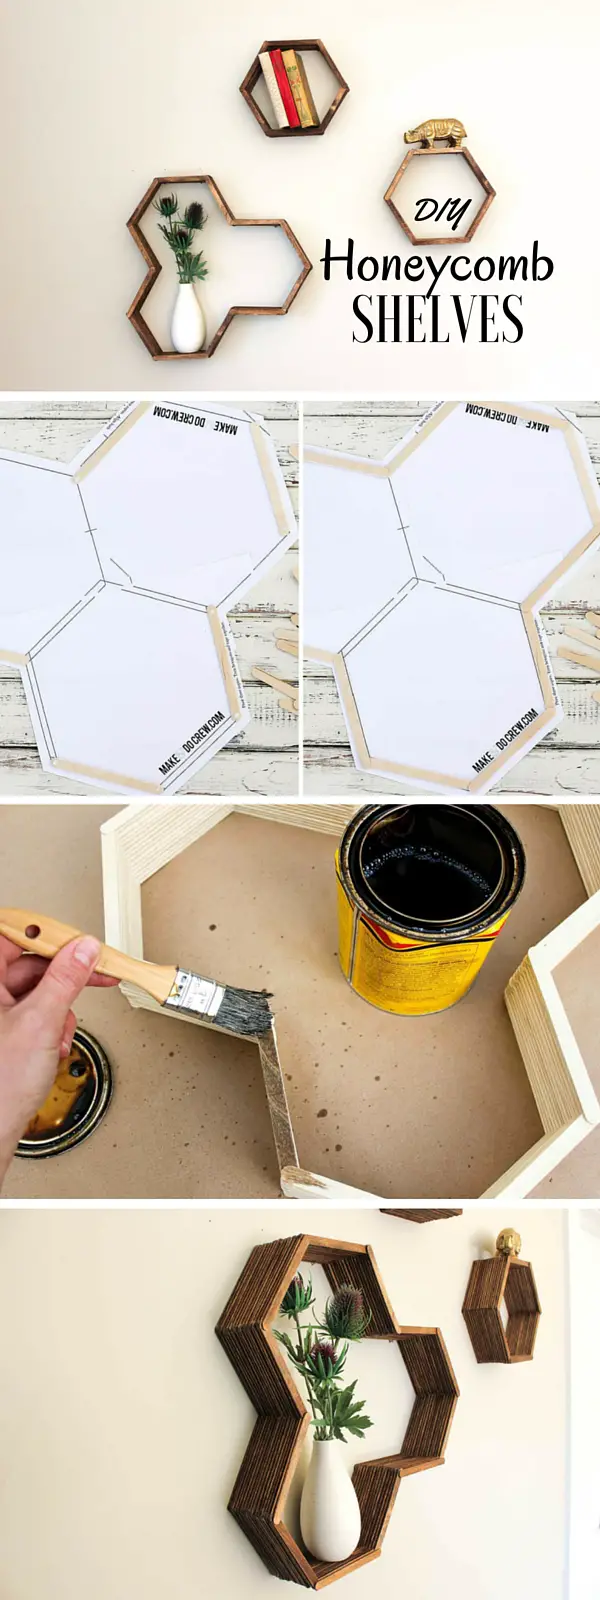 Check out the tutorial: #DIY Honeycomb Shelves @istandarddesign